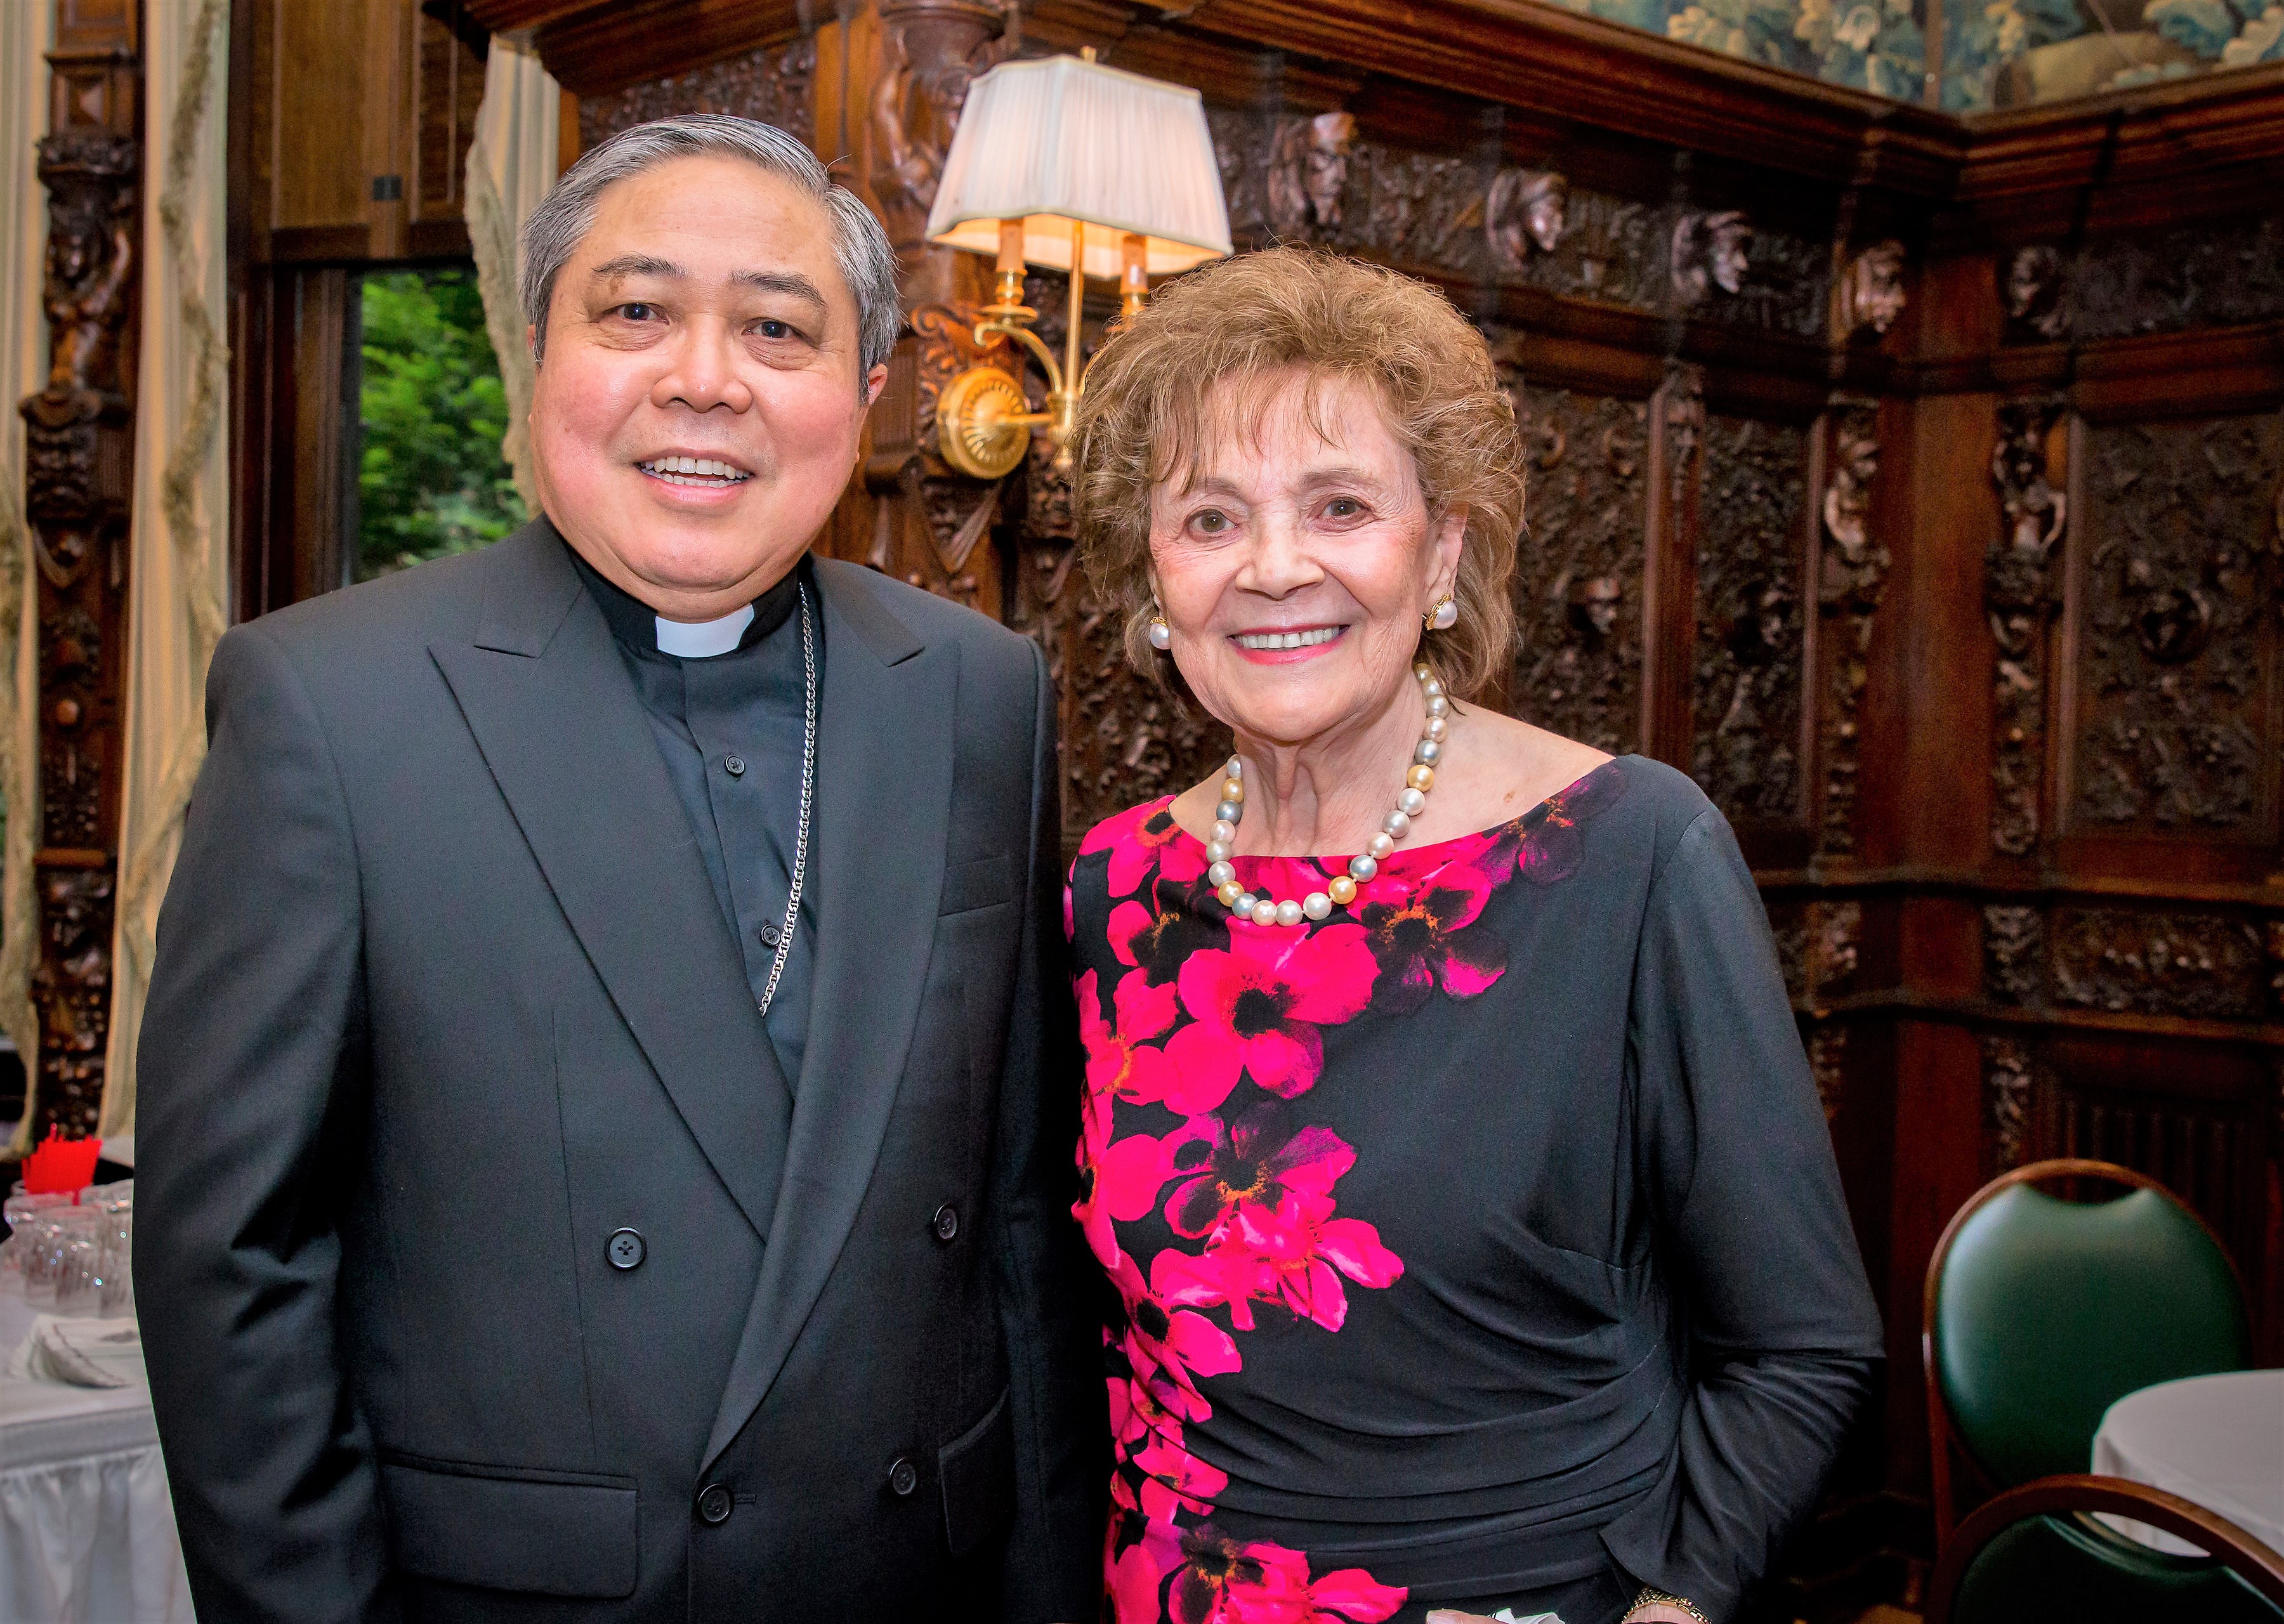 His Excellency Archbishop Bernardito Auza, Permanent Observer of the Holy See to the United Nations with Chivalry Award Recipient Matilda Cuomo